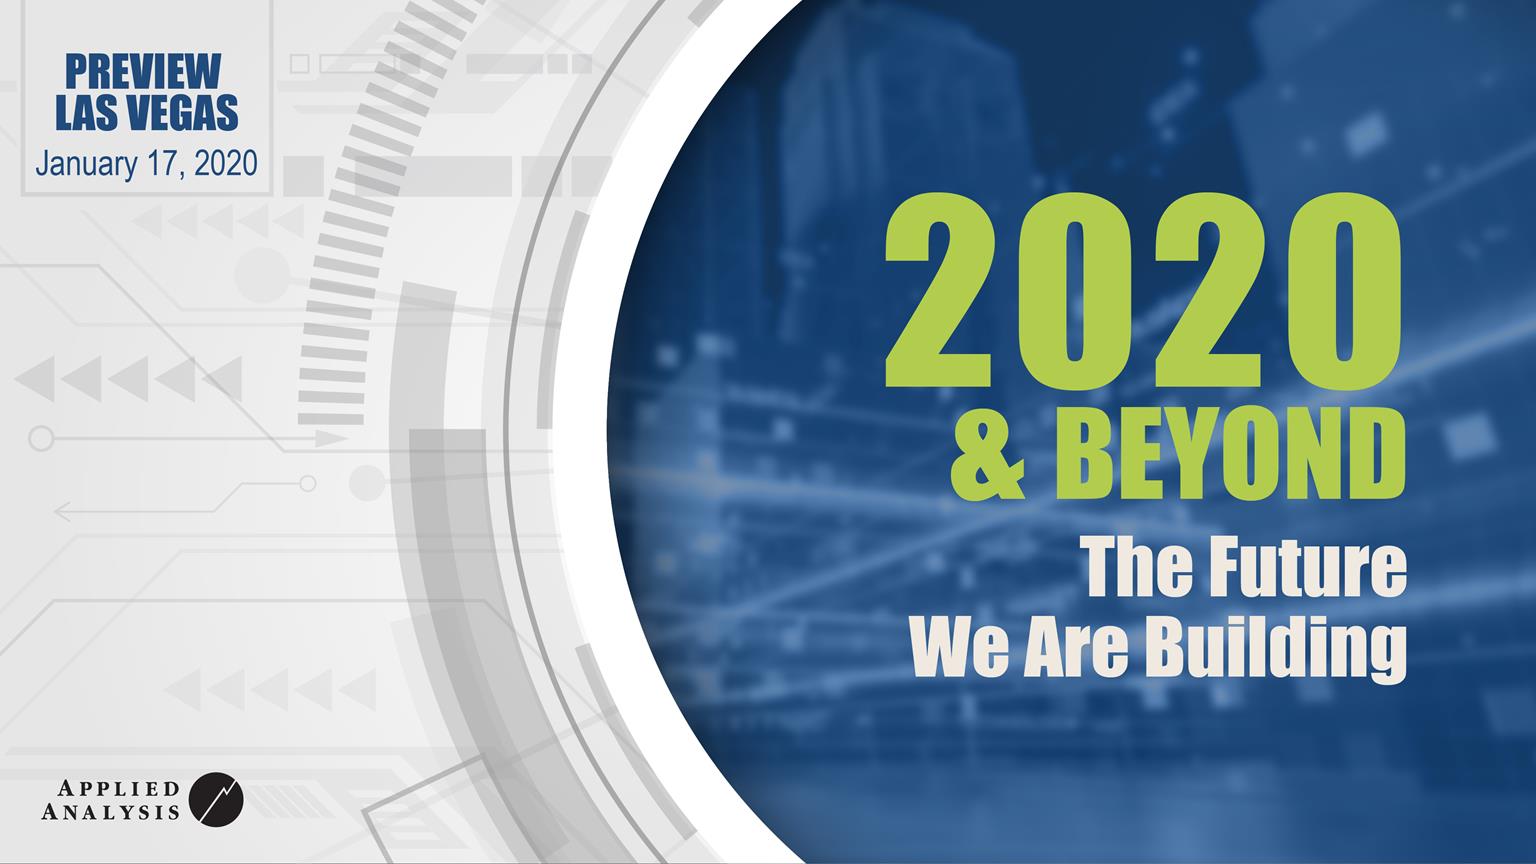 Las Vegas Metro Chamber of Commerce 2020 & Beyond: The Future We Are Building